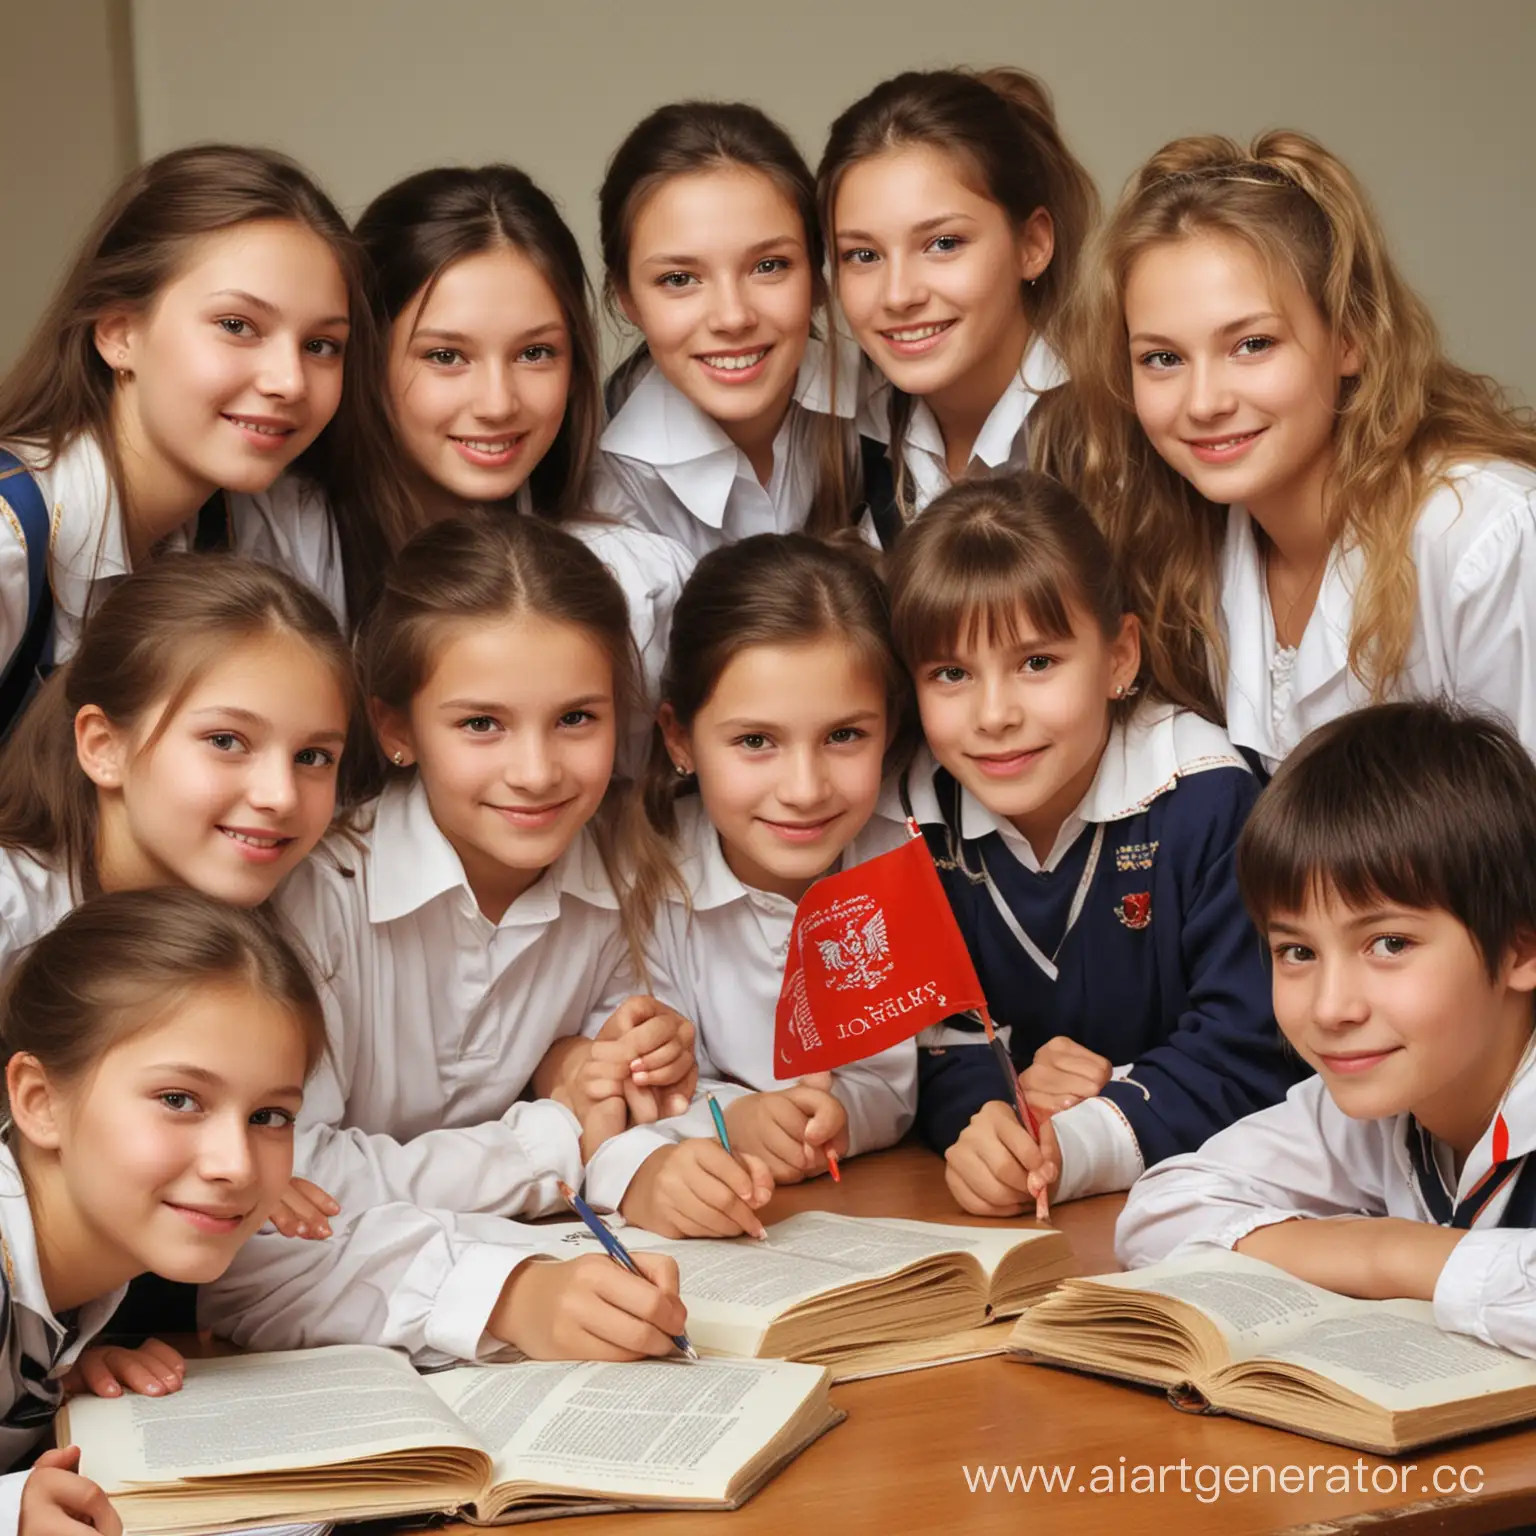 Multicultural-Russian-Education-Joyful-Learning-in-Diverse-Classrooms